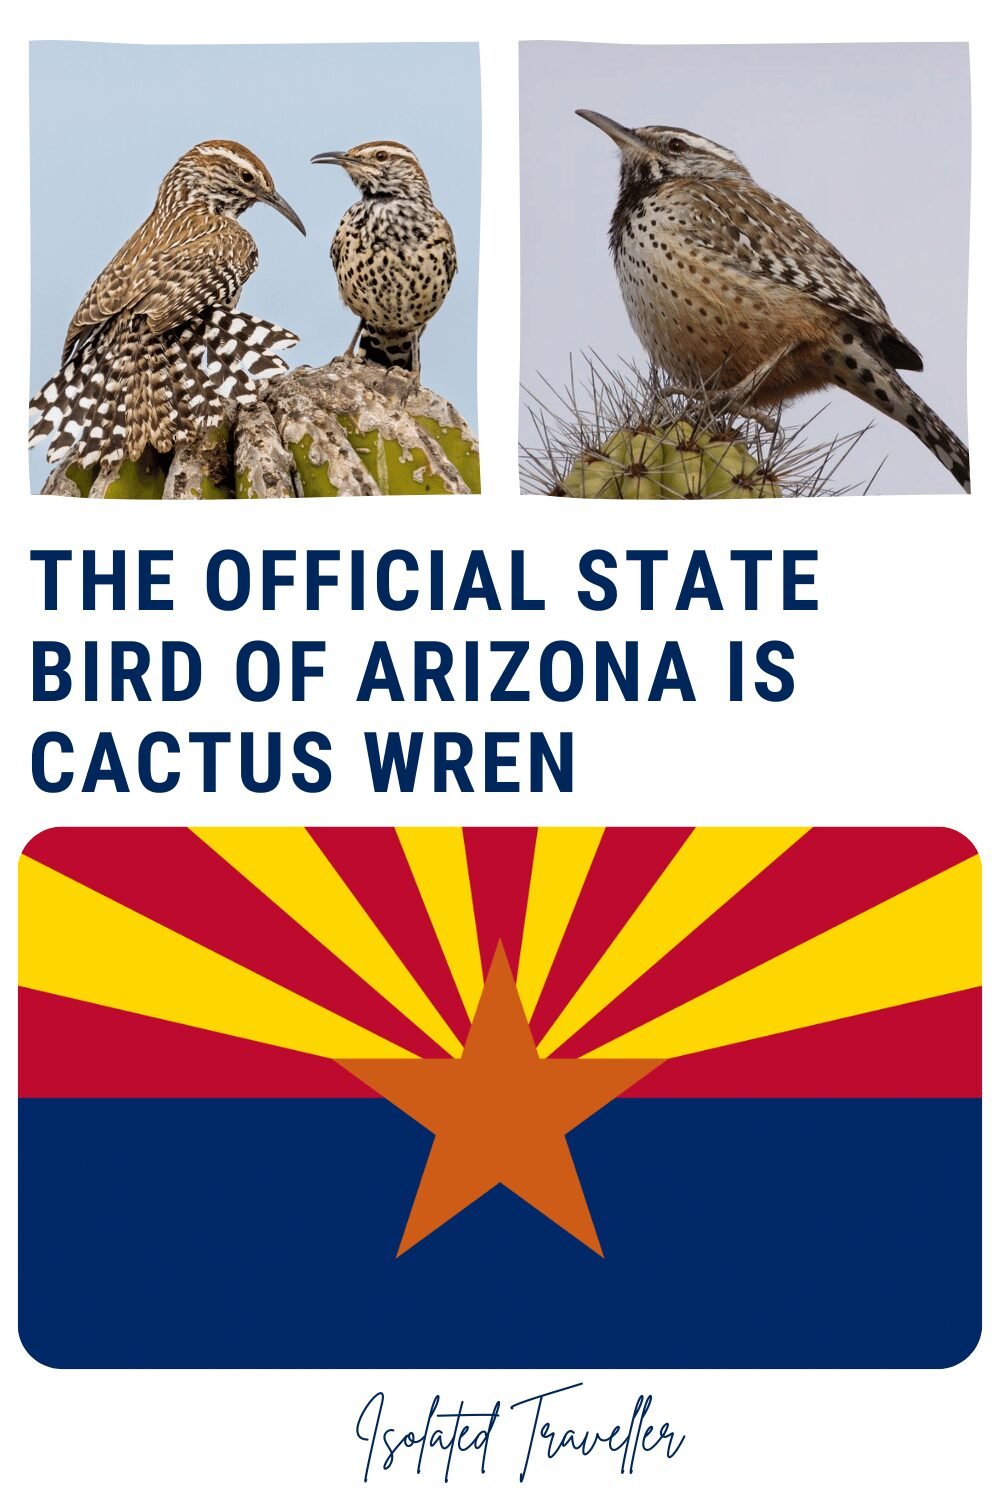 The Official State Bird of Arizona is Cactus Wren